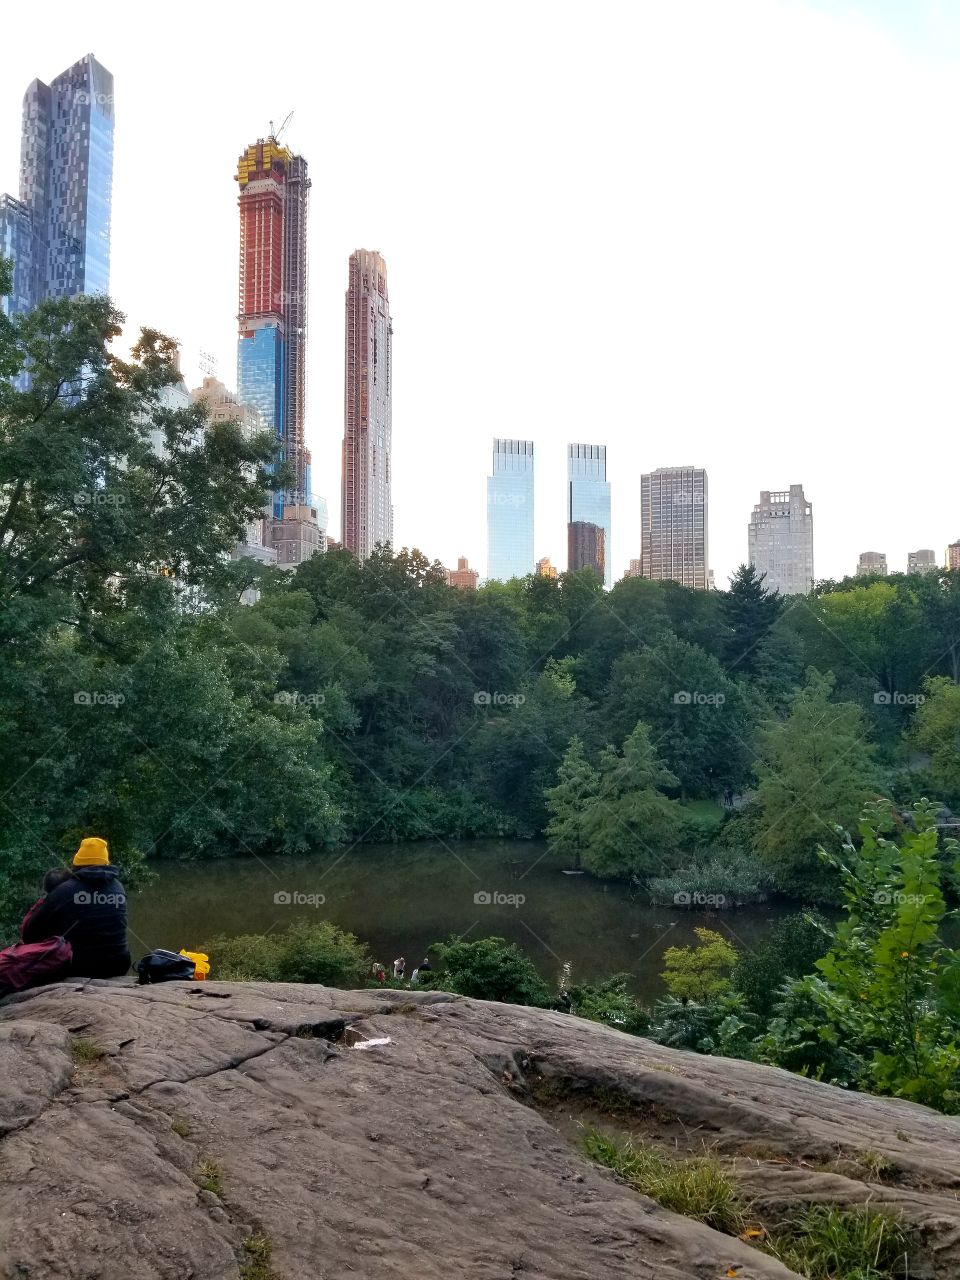 A little countryside, with a city skyline. Central Park, NYC